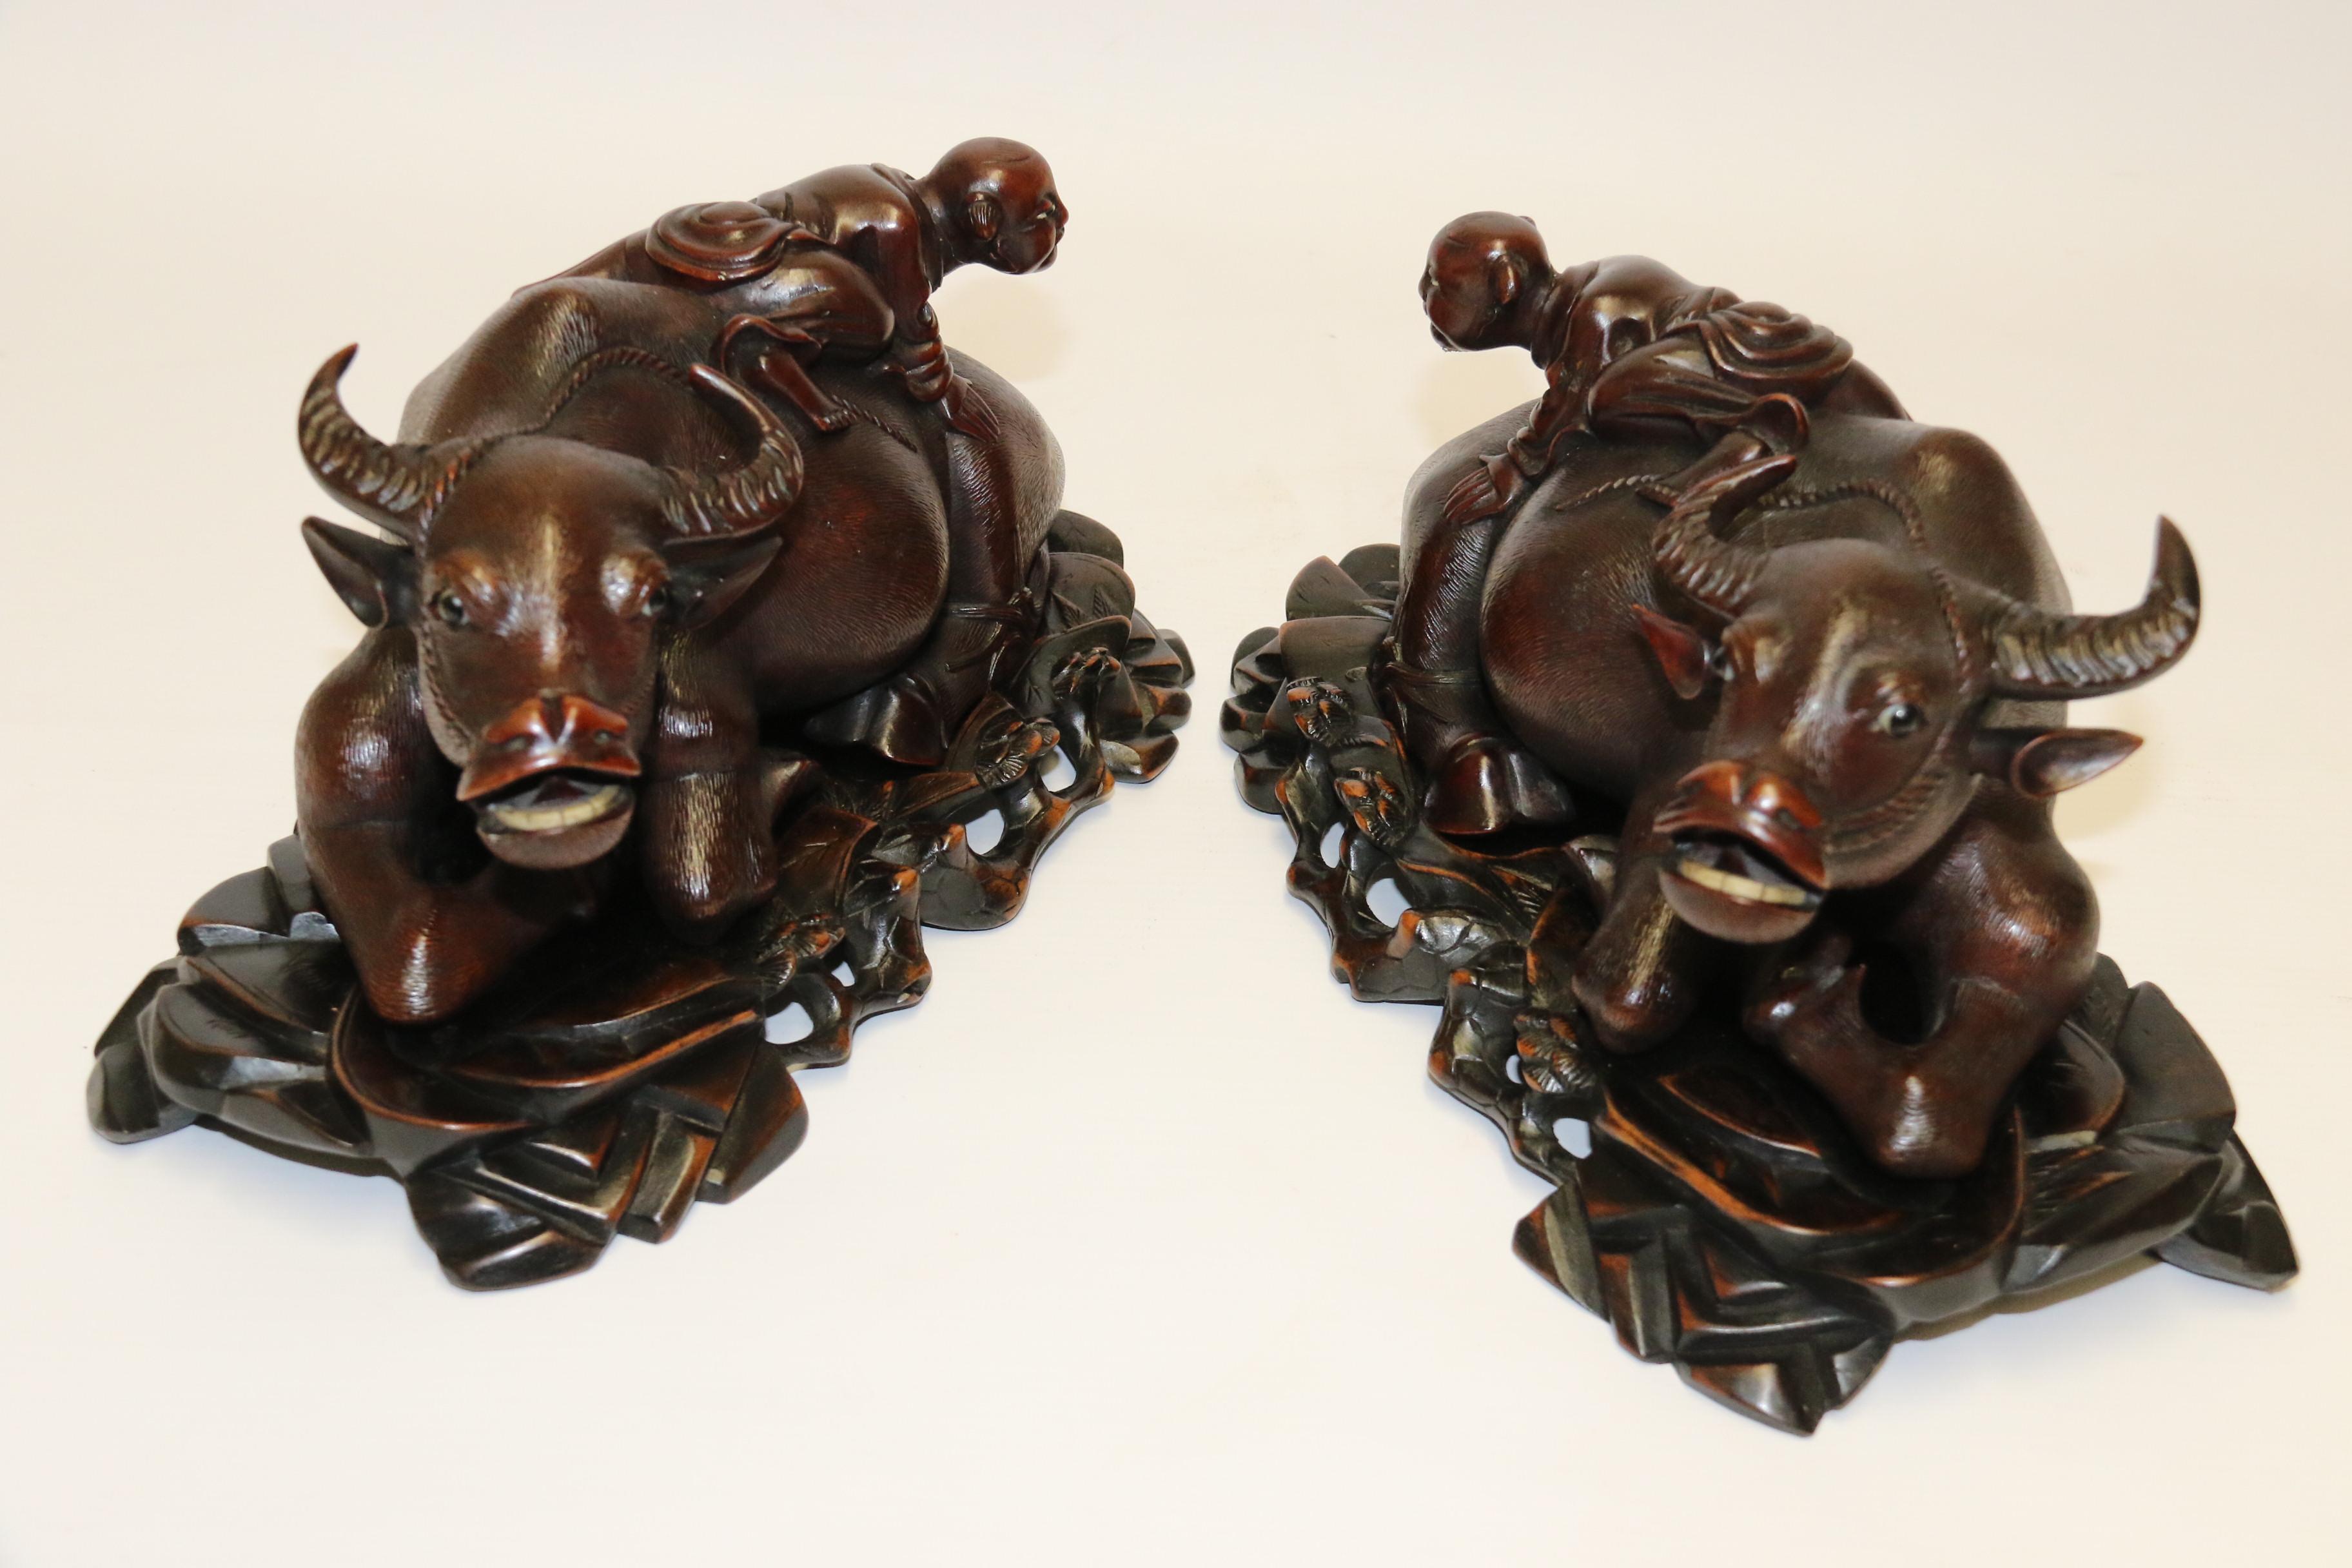 This pair of late 19th century Chinese hardwood figures are superbly carved with amazing detail. They depict two water buffalo which are lying down and humorously each one has a boy climbing on its back. The expressions of the shocked buffalo are